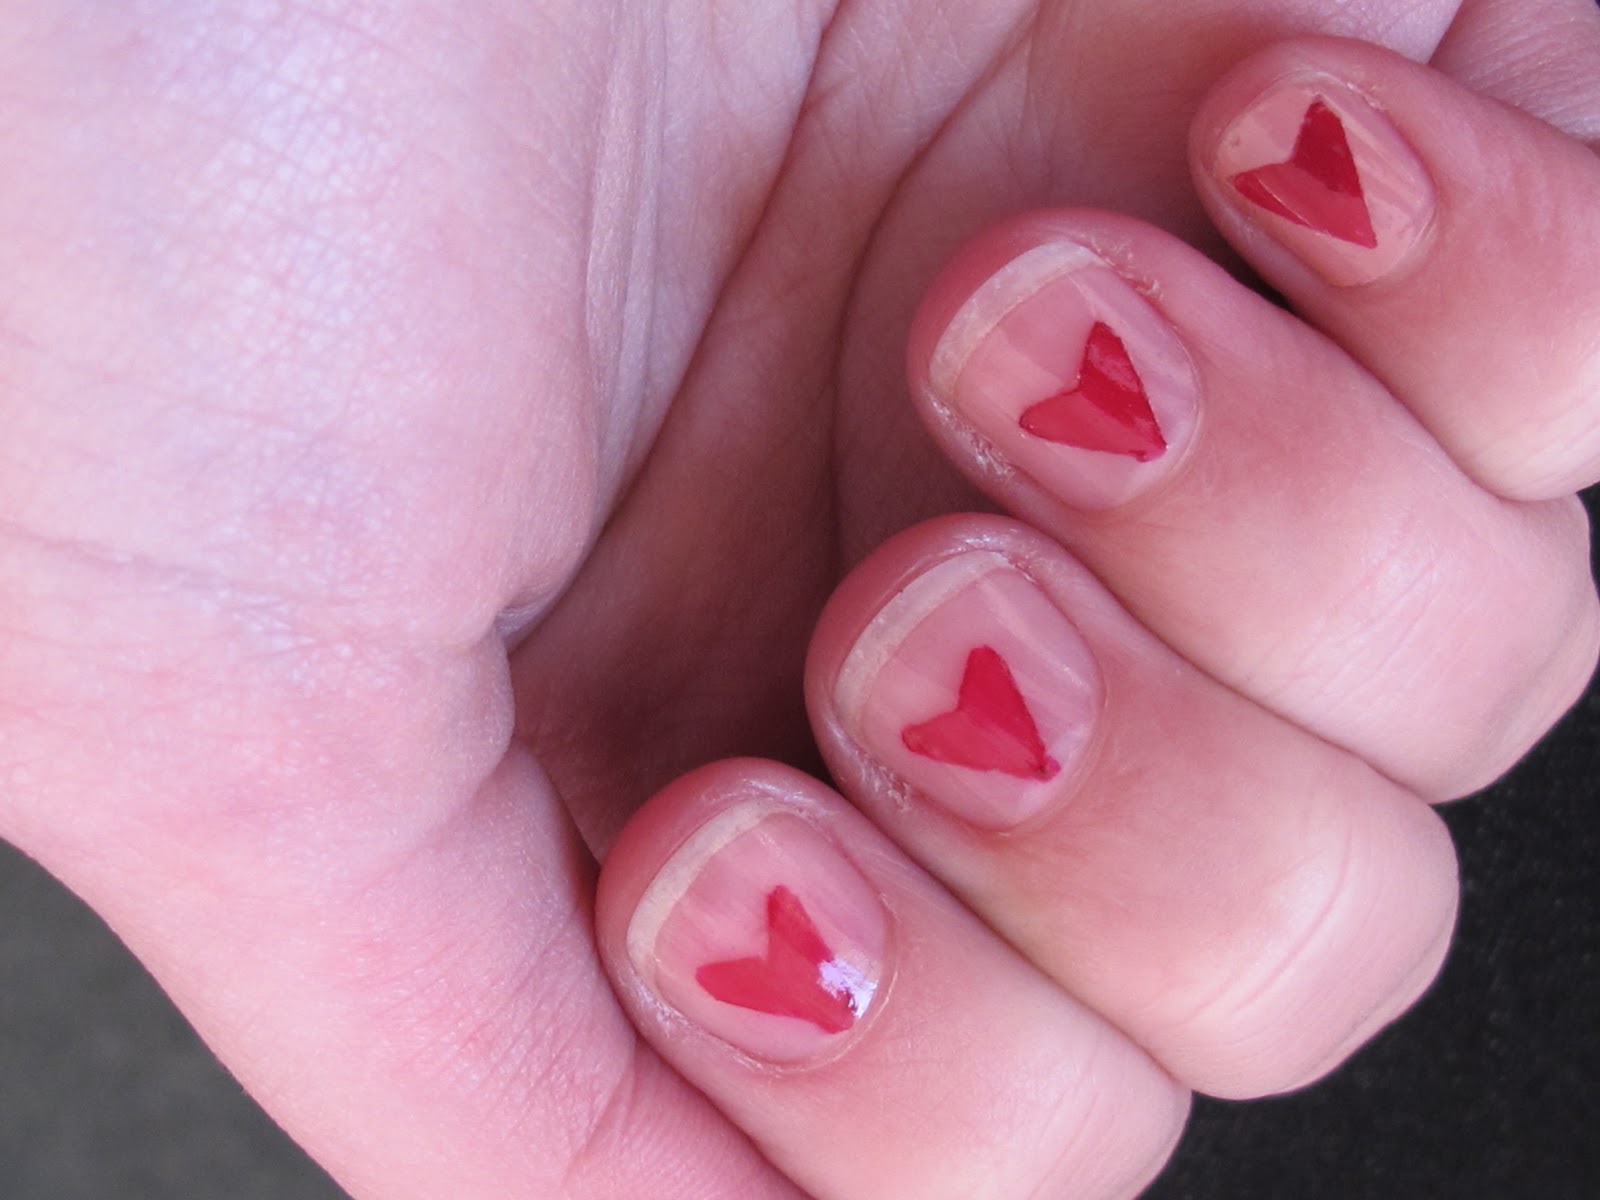 heart on nails